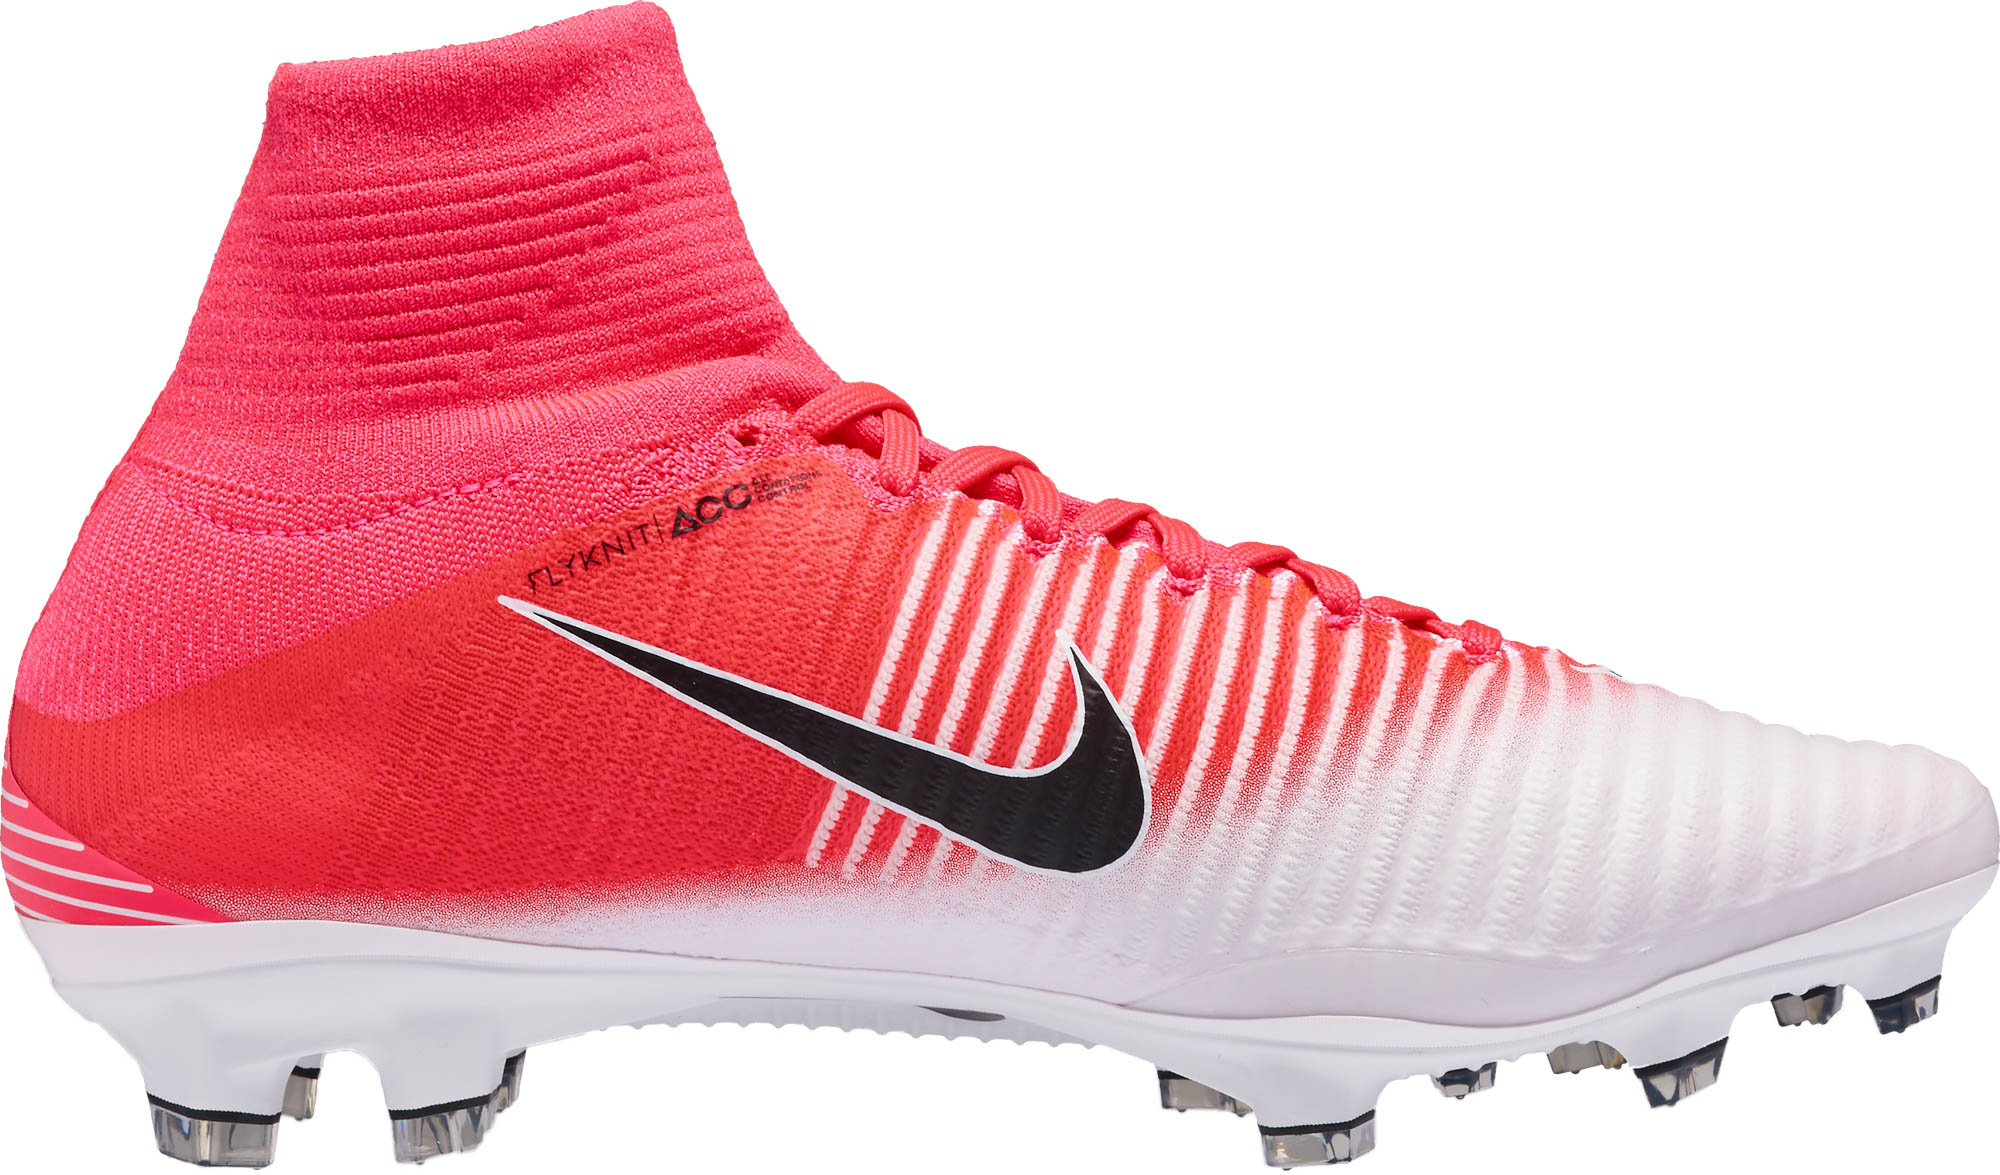 Nike Mercurial Superfly V - Pink Superfly Soccer Cleats